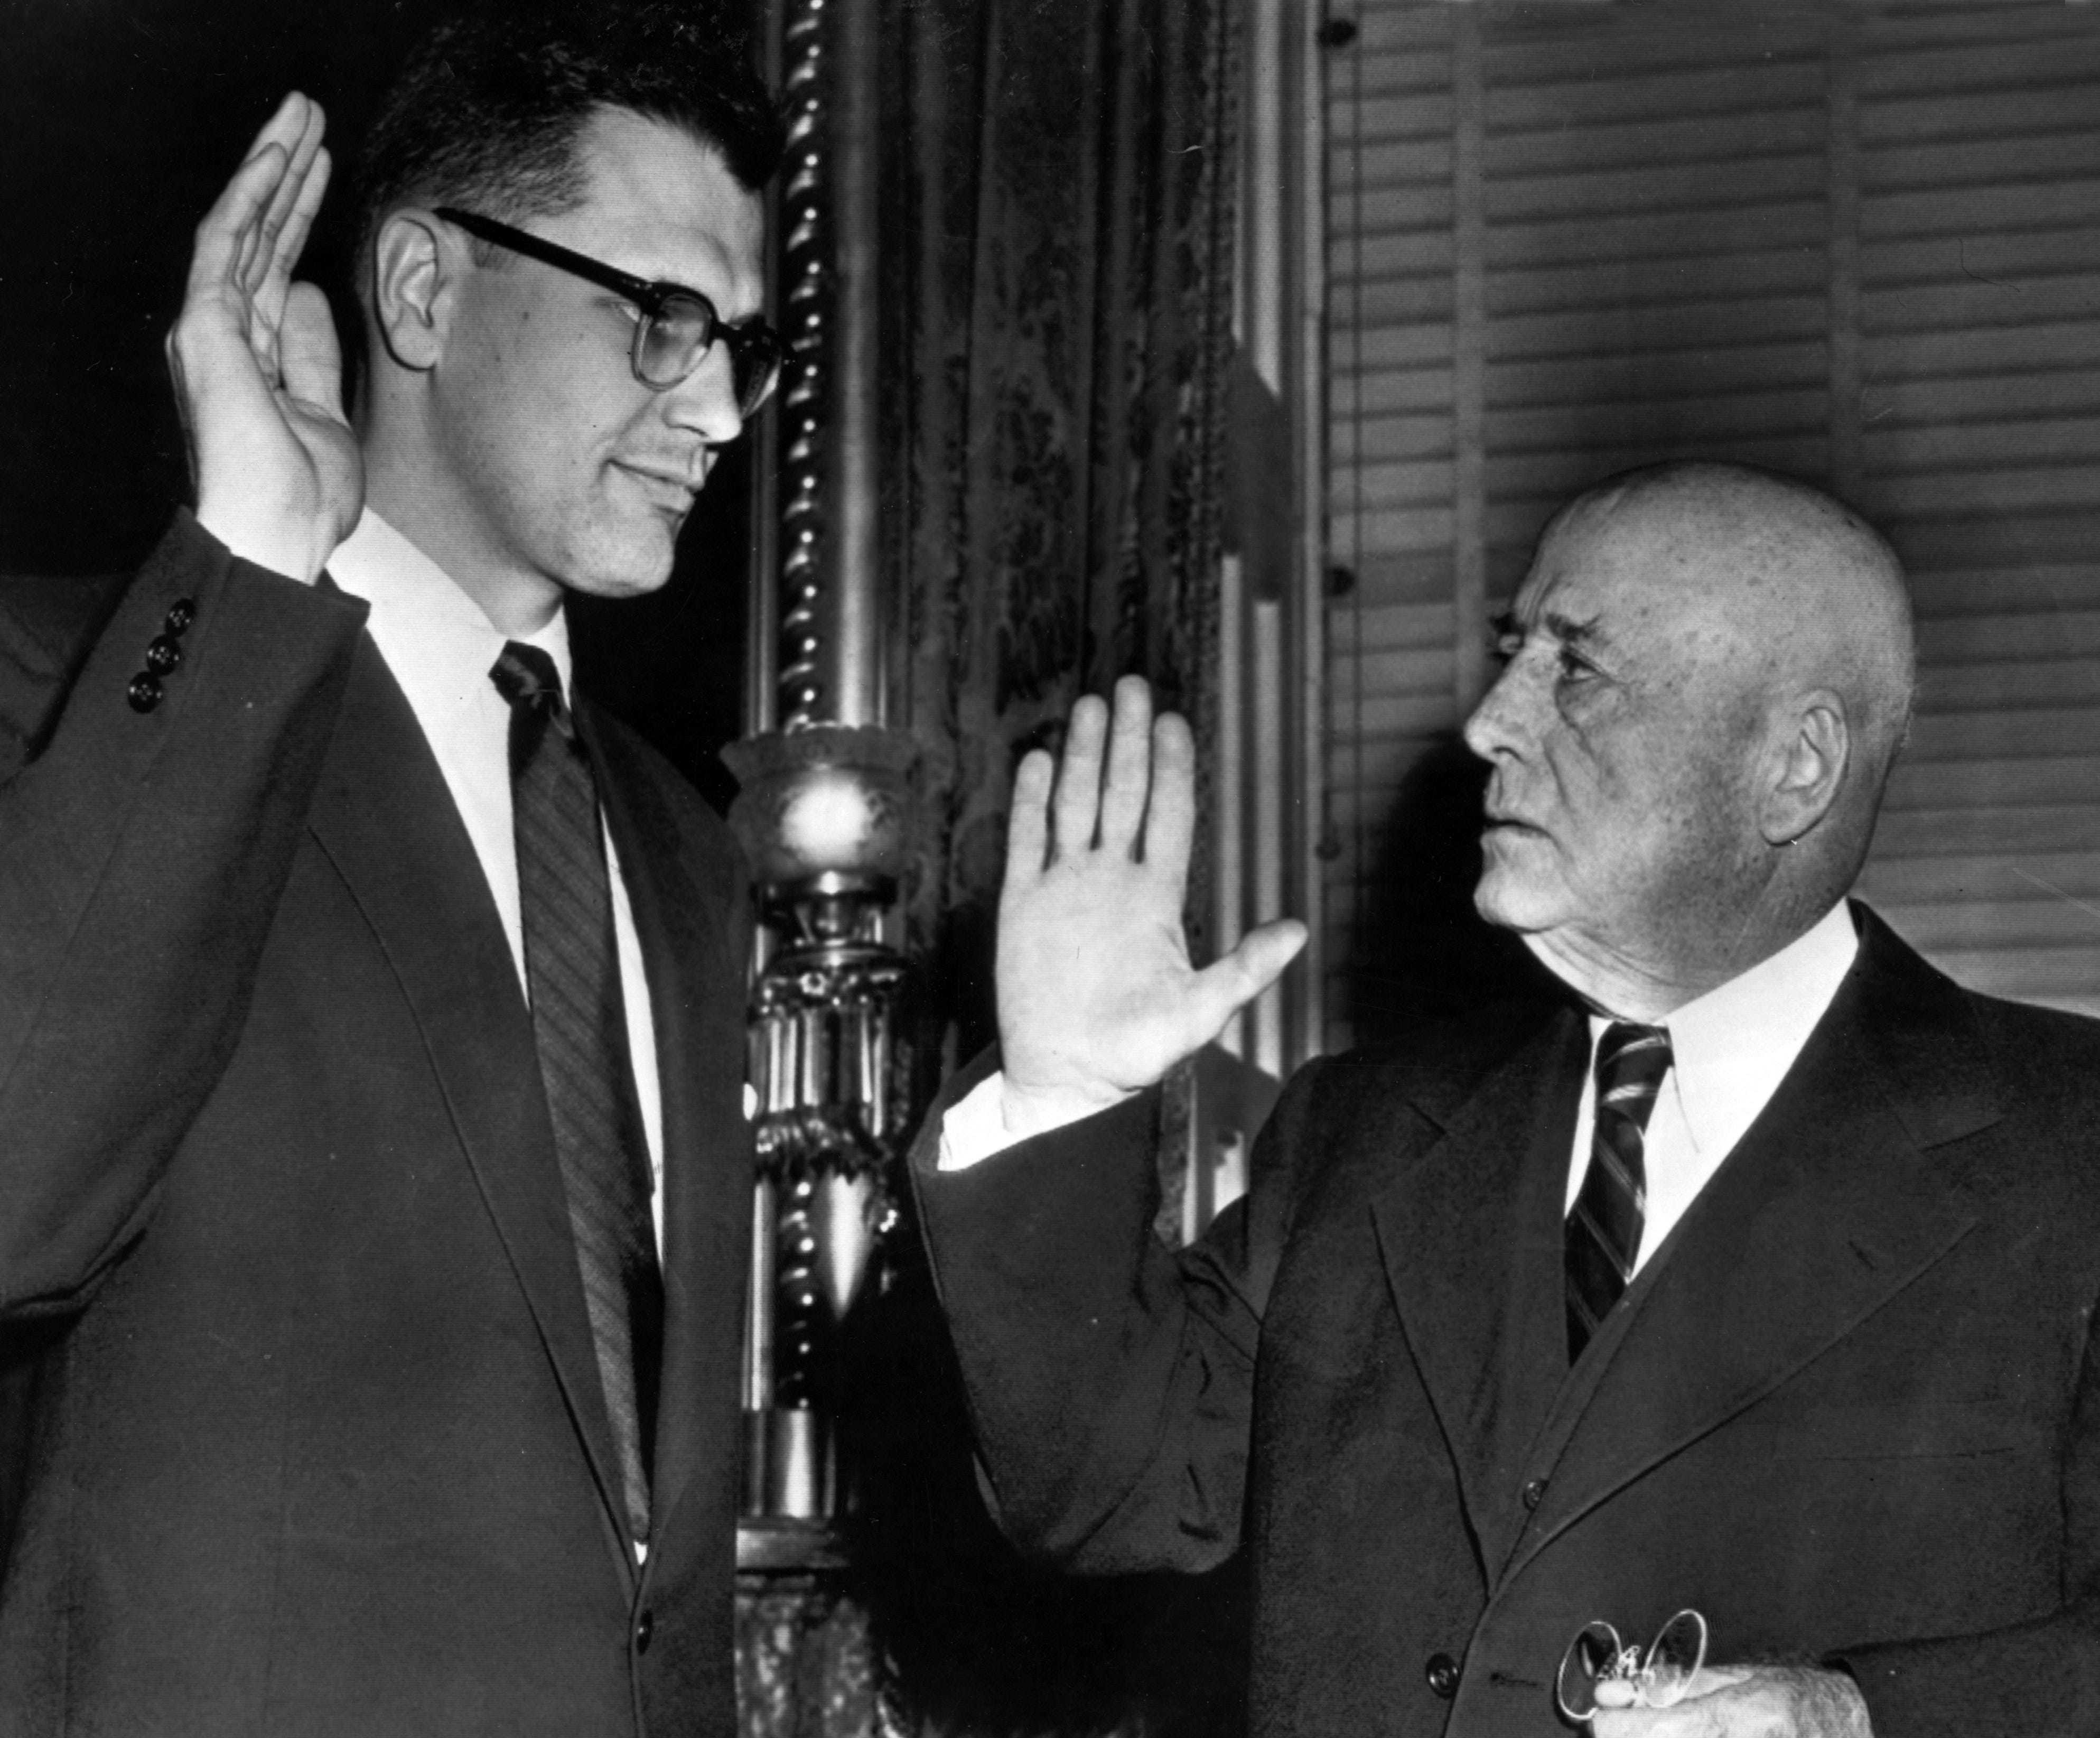 In 1955, John Sr. died and John Jr. won a special election to succeed him in the U.S. House. 
Above, Dingell is sworn in as a Congressman in 1956.